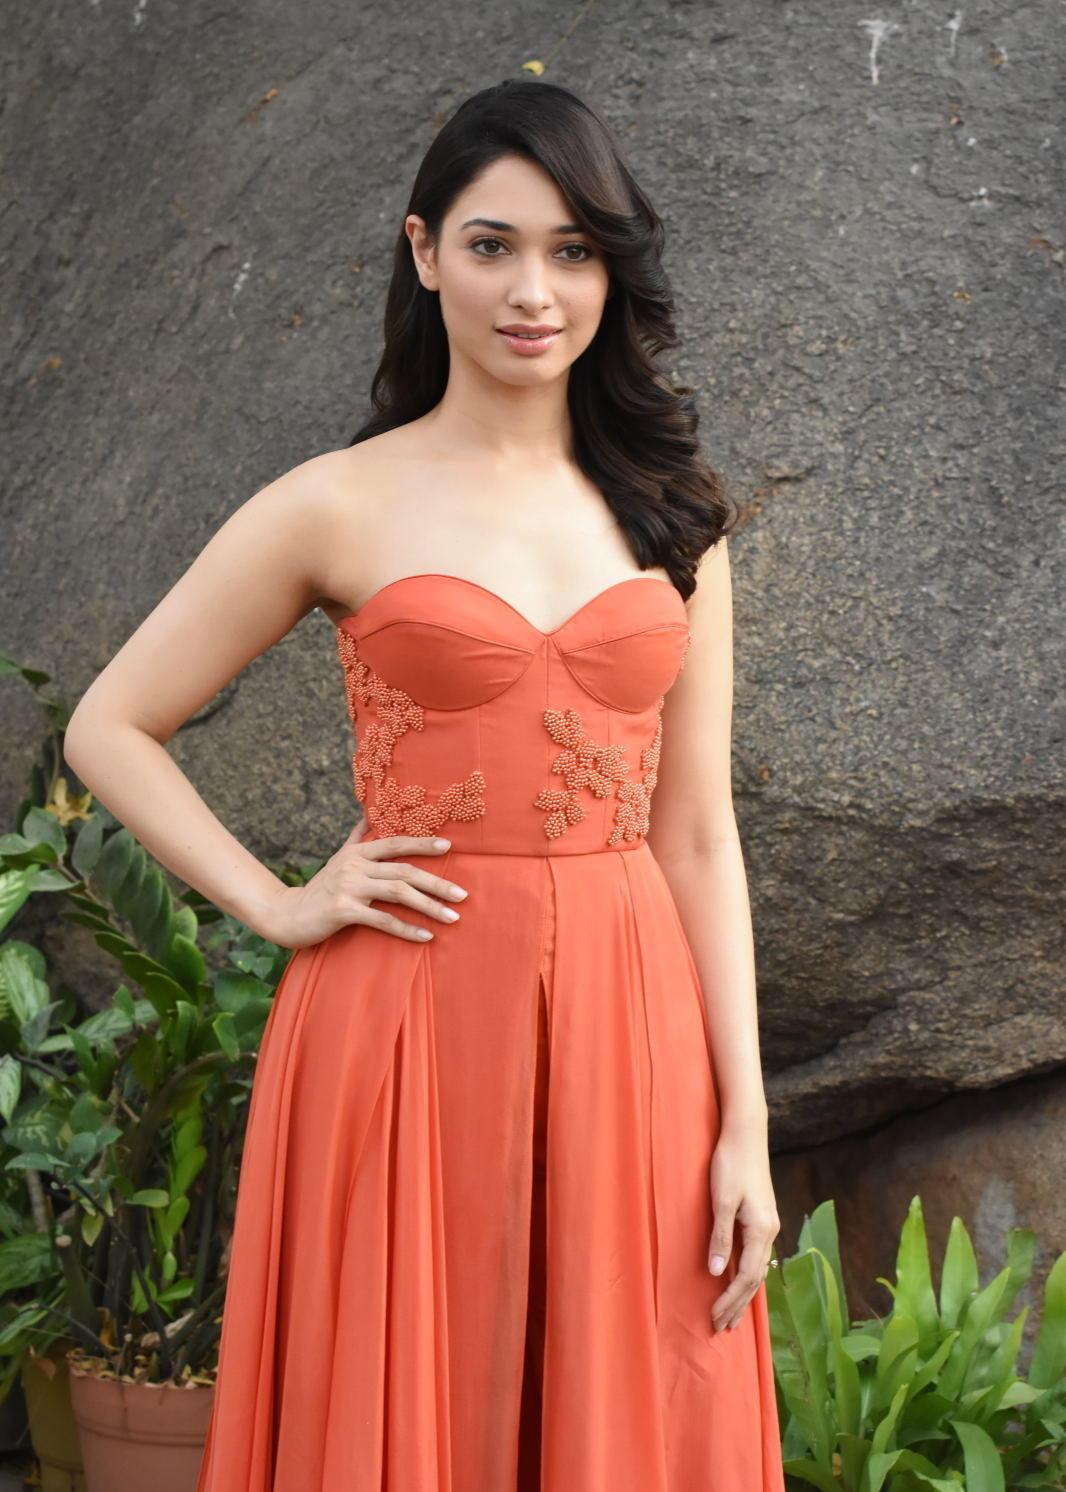 High Quality Bollywood Celebrity Pictures Tamannaah Bhatia Looks Super